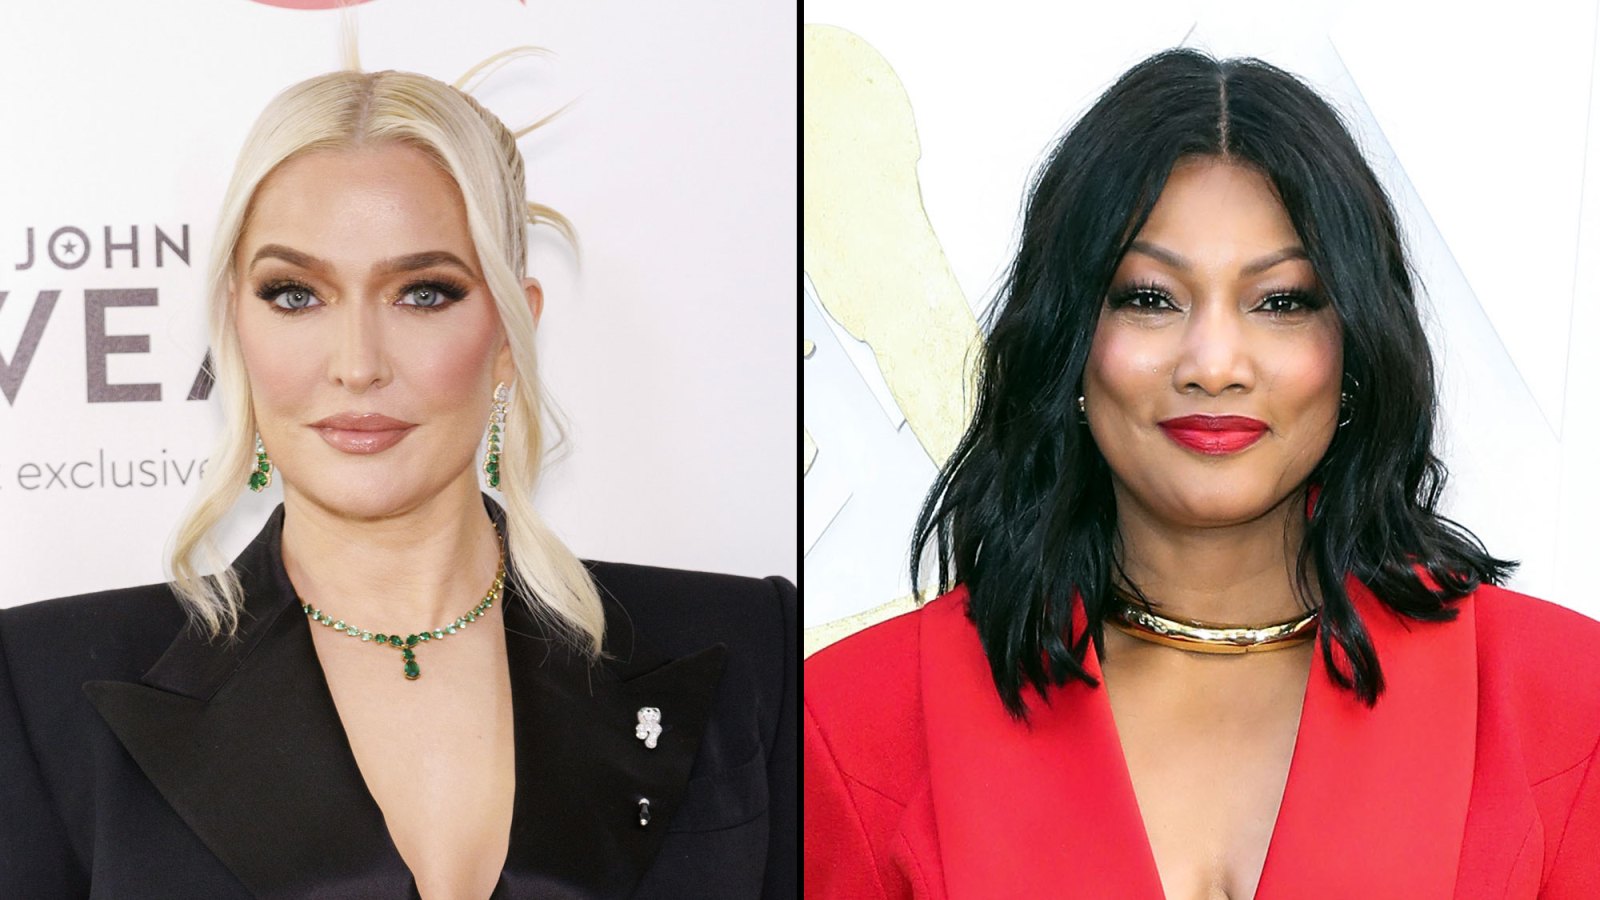 Why Erika Jayne Threw Out RHOBH Castmate Garcelle Beauvais Book